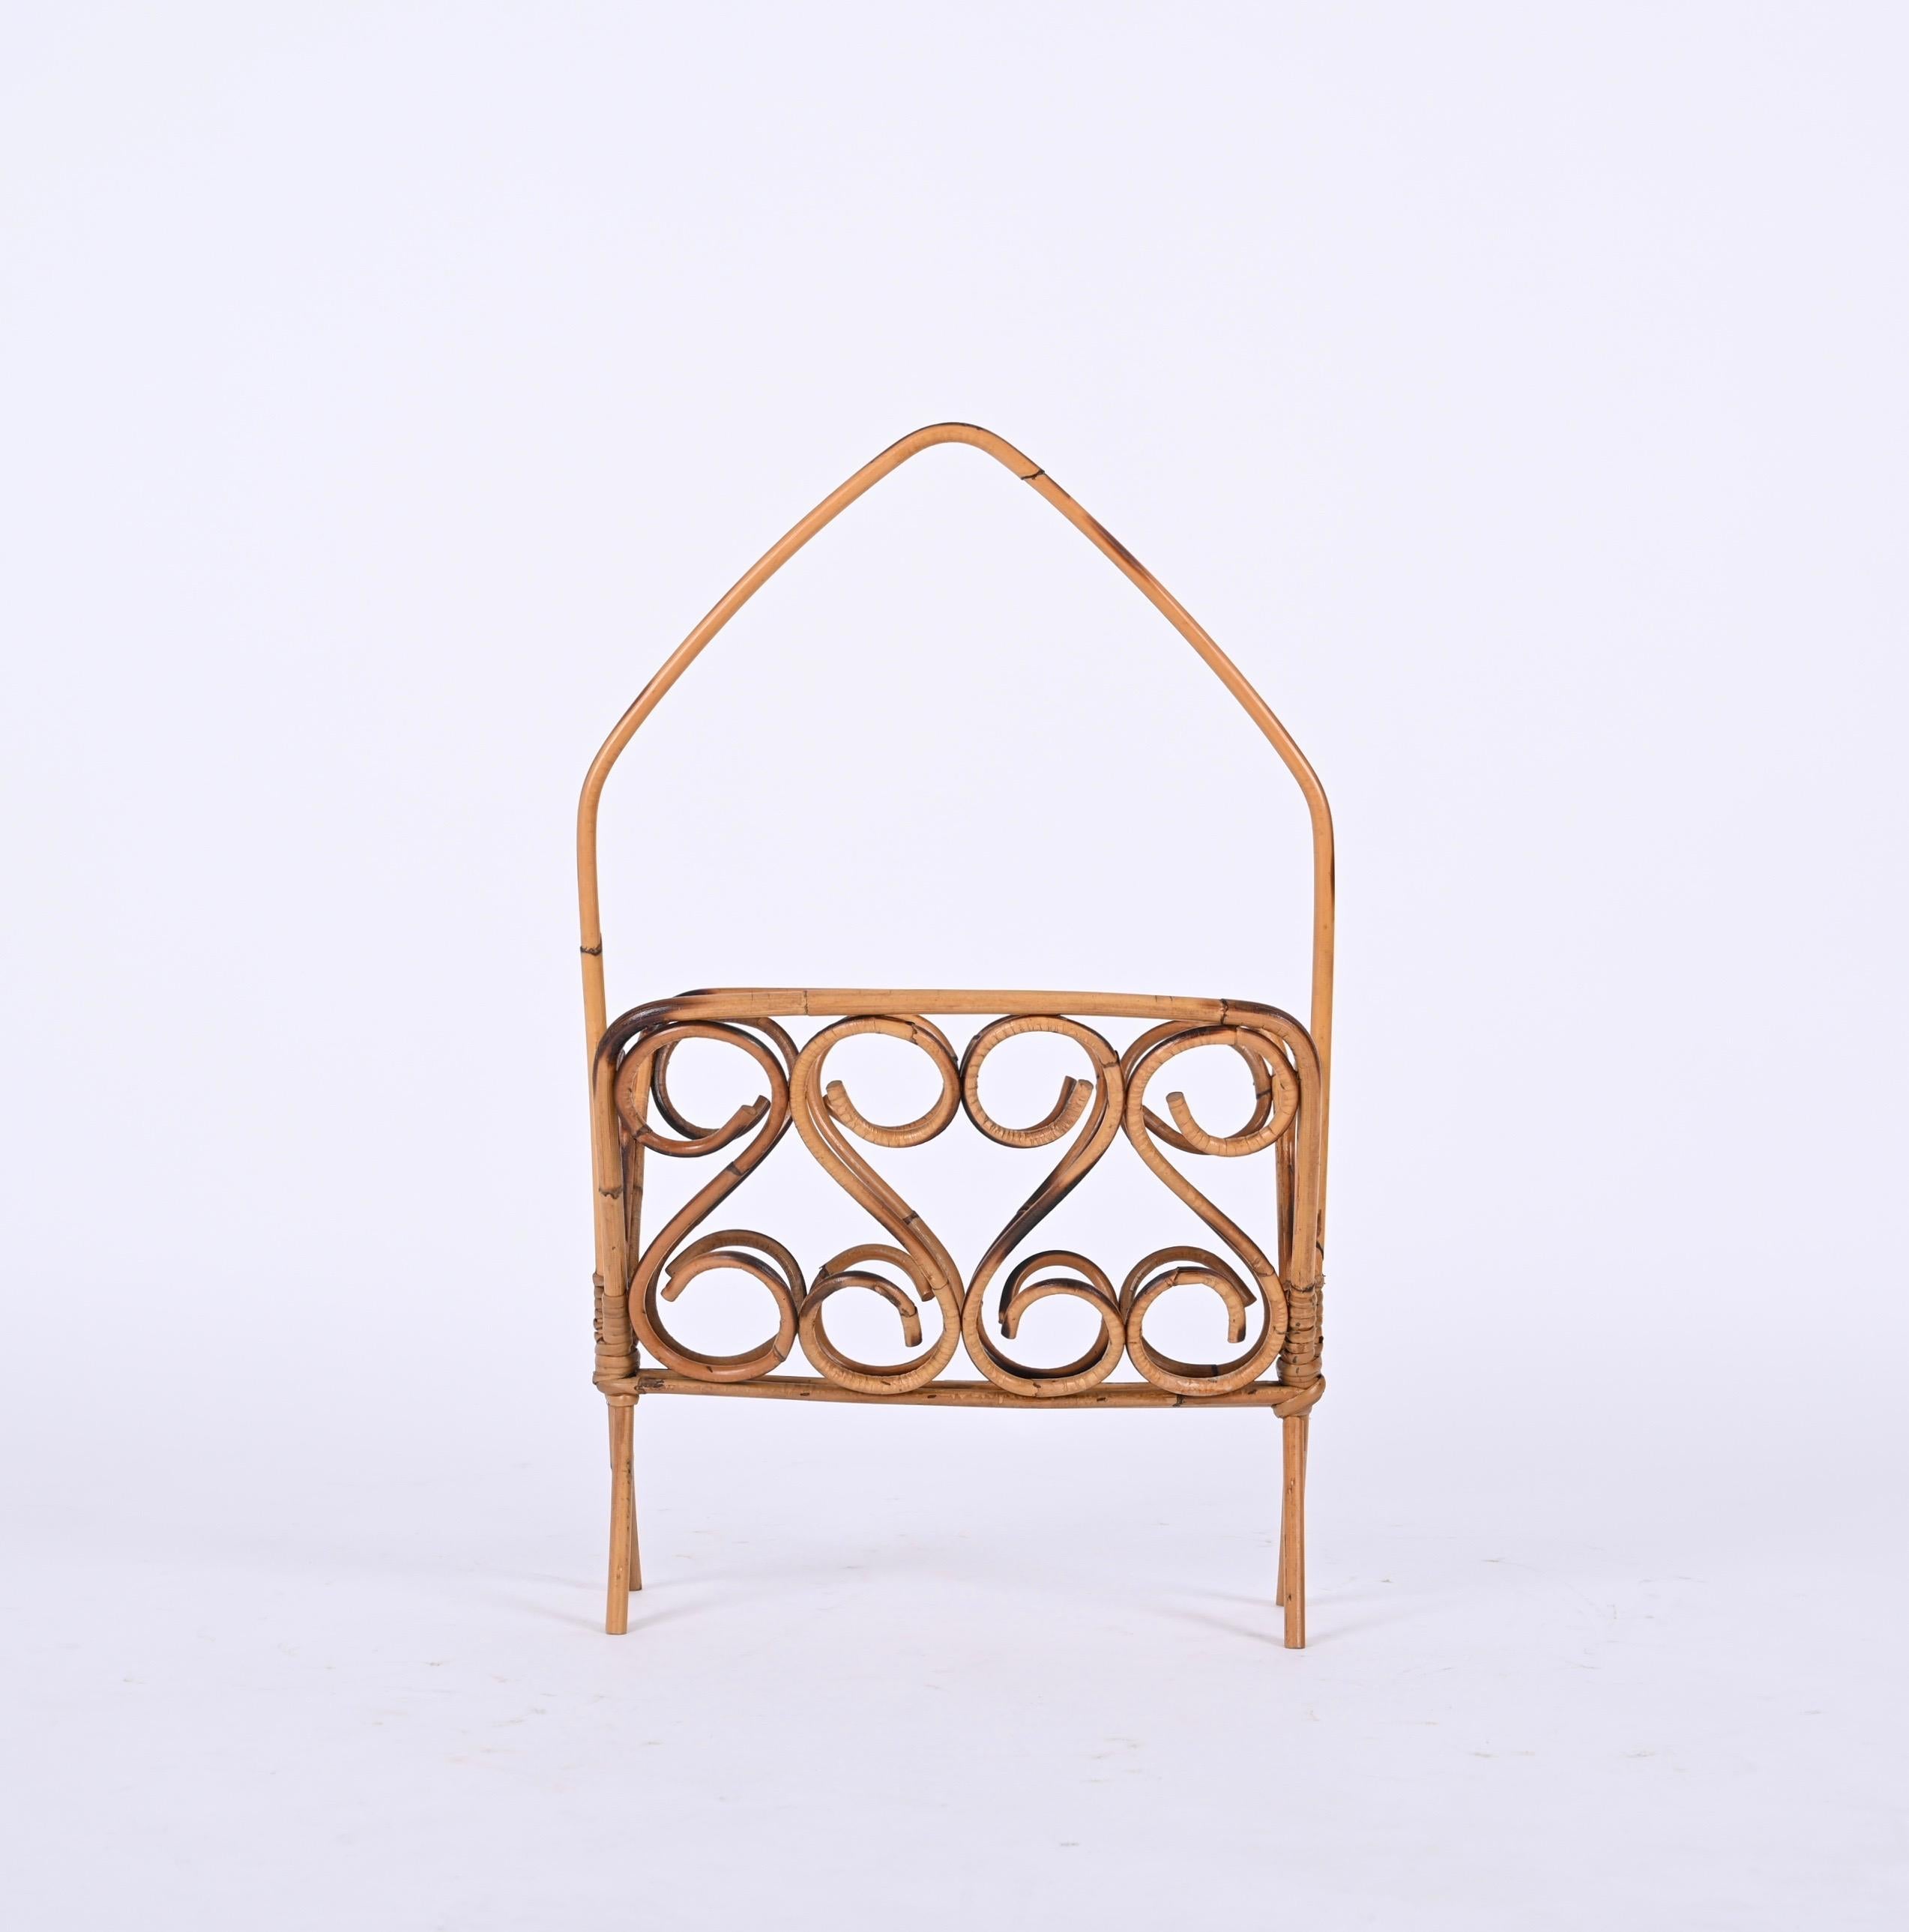 Midcentury French Riviera Bamboo and Rattan Italian Magazine Rack, 1960s For Sale 5